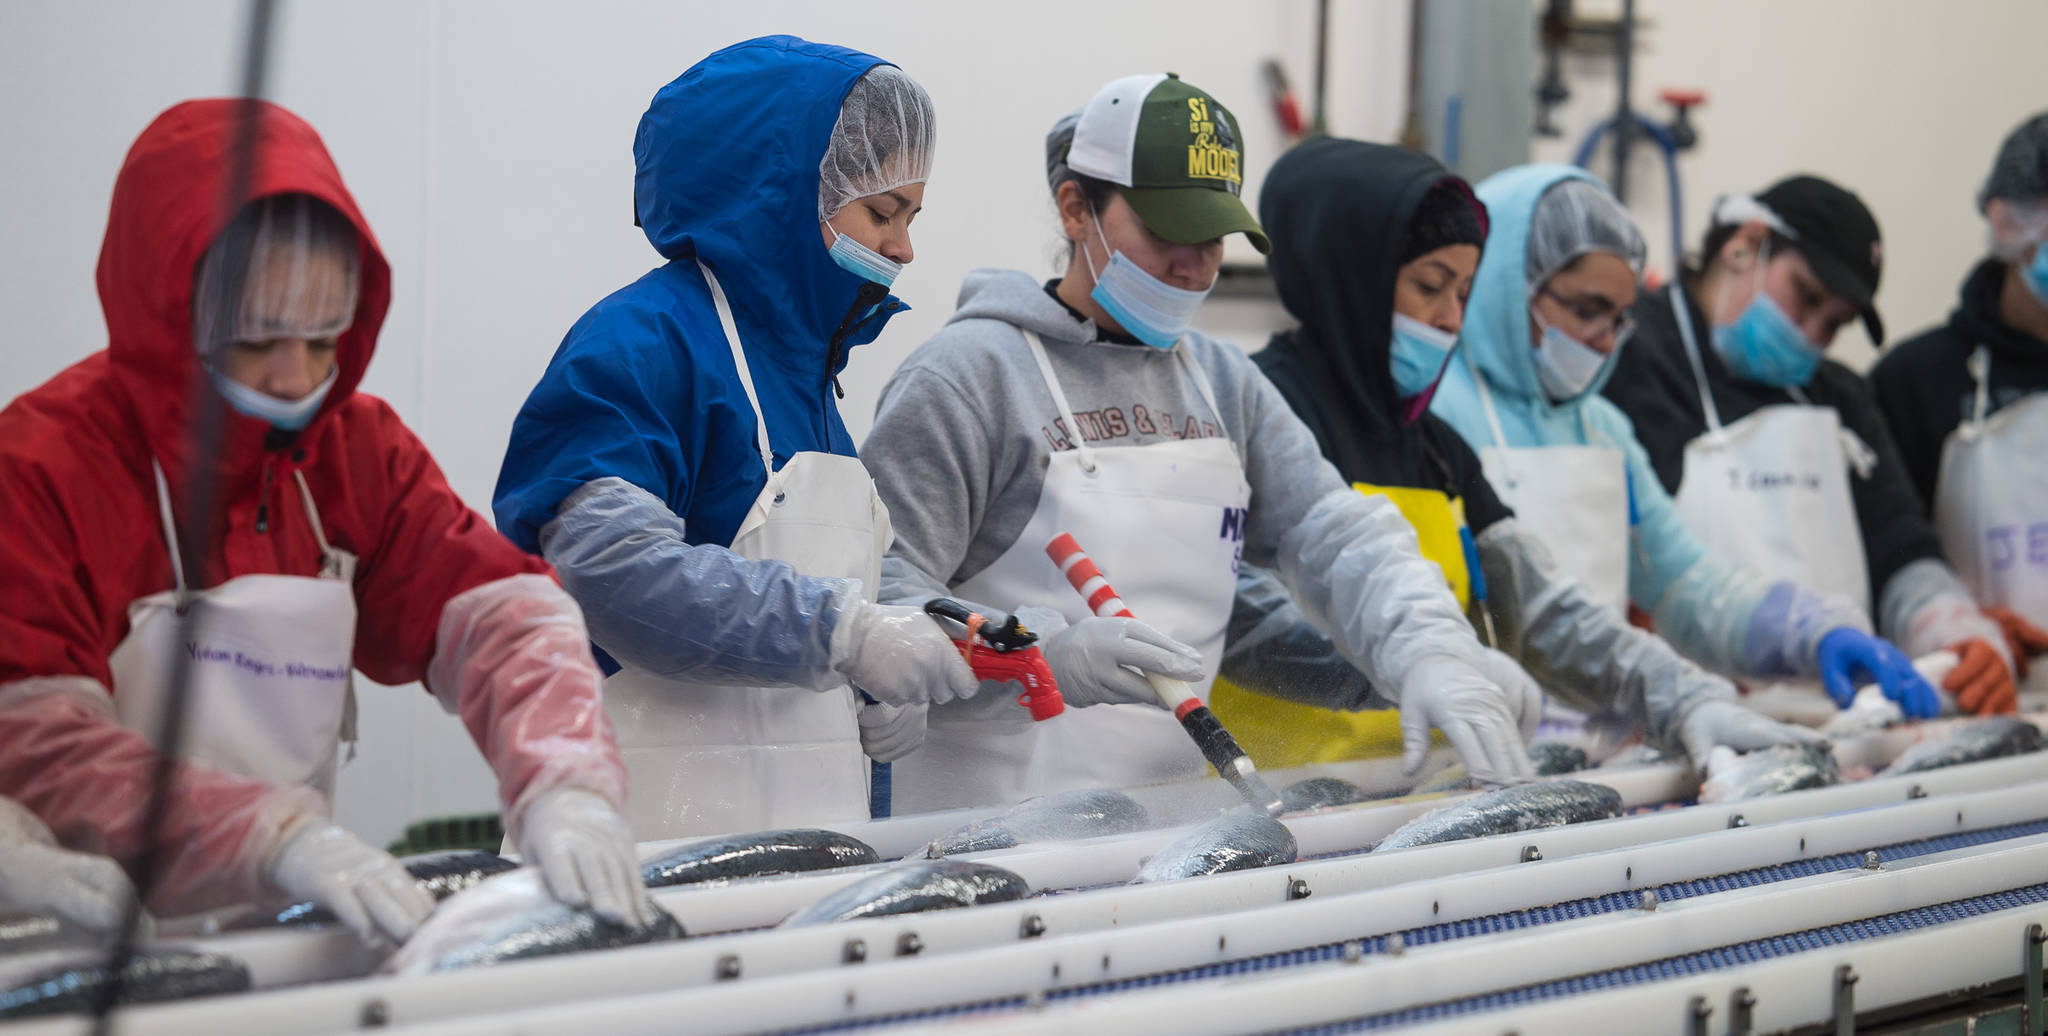 Salmon is processed at Alaska Glacier Seafoods on Tuesday, July 25, 2017. (Michael Penn | Juneau Empire)